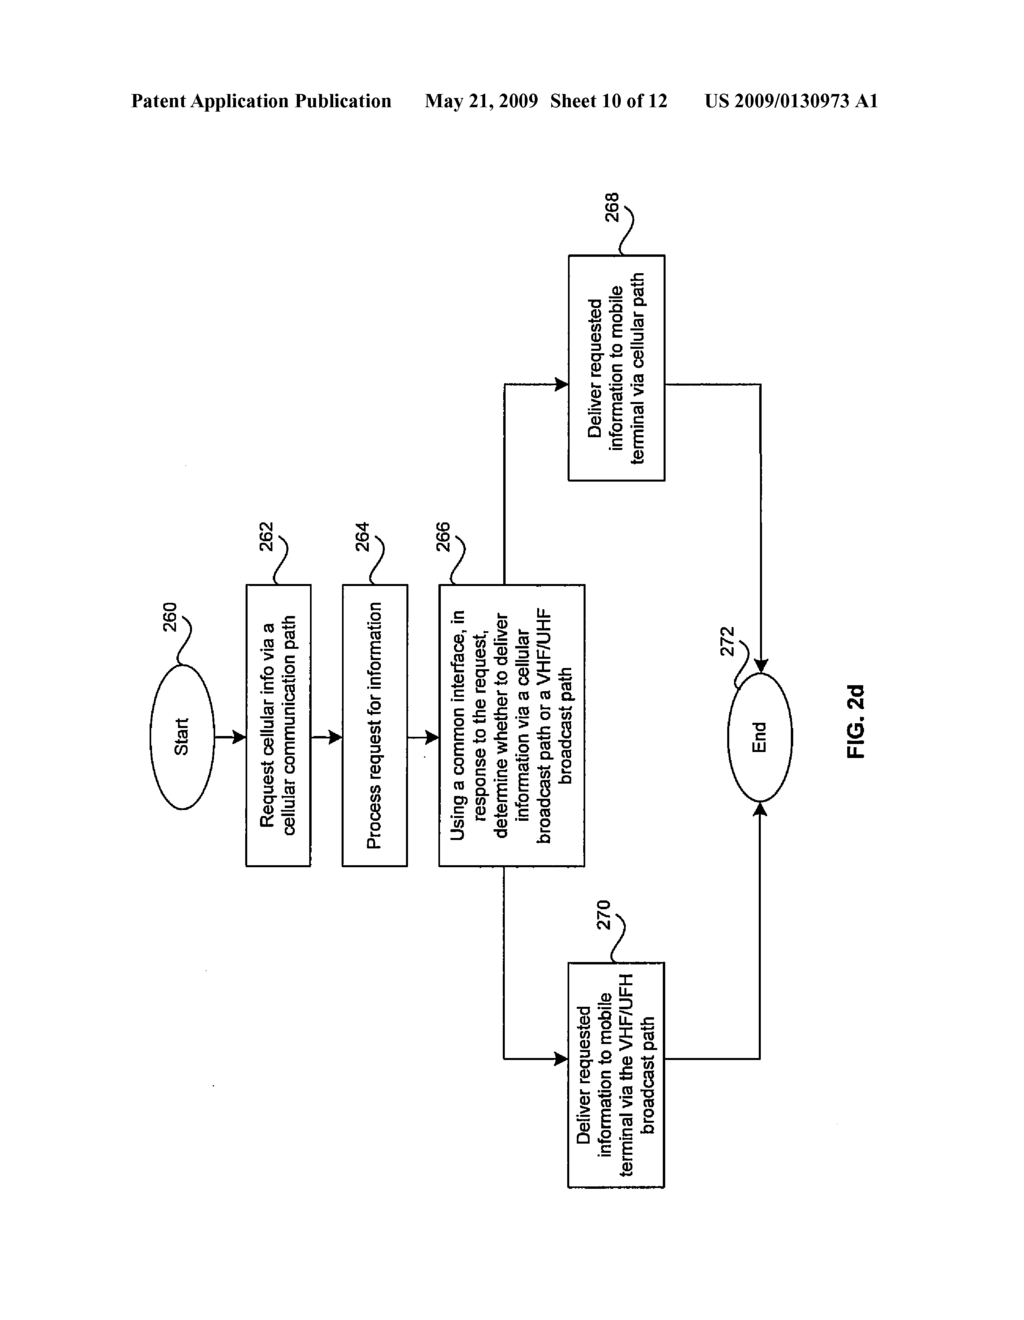 Method and System For Cellular Network and Integrated Broadcast Television (TV) Downlink With Intelligent Service Control - diagram, schematic, and image 11